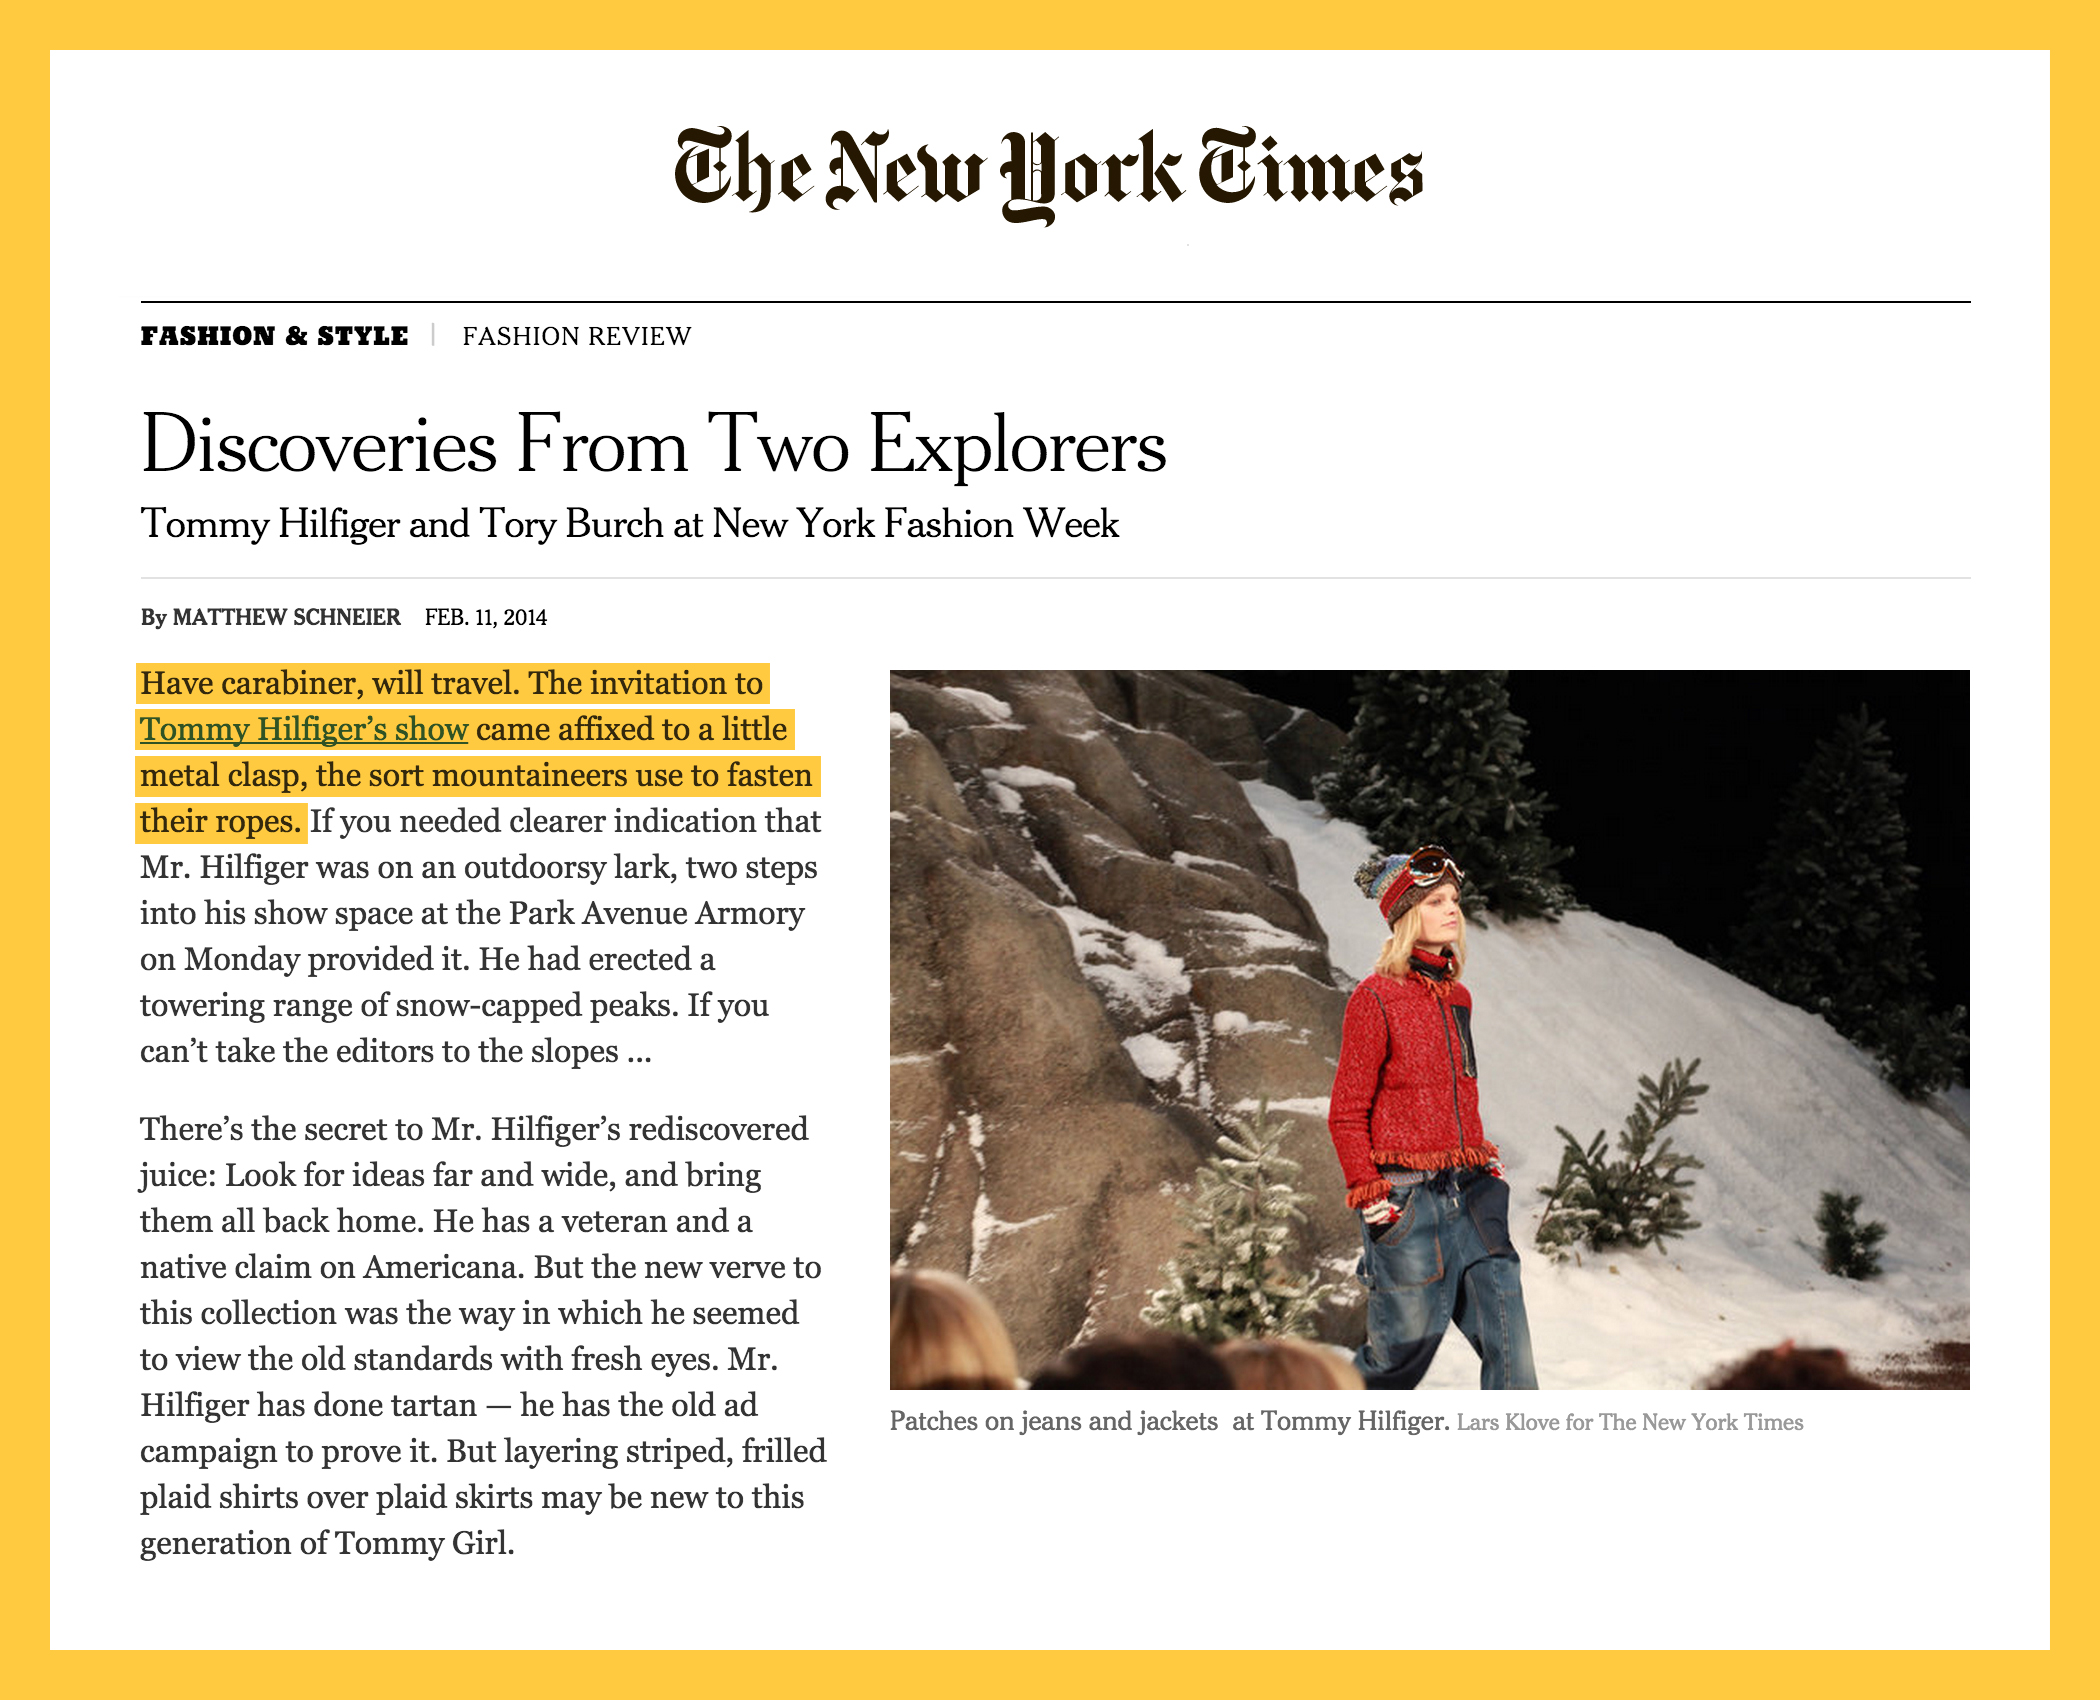  Reaching the peak with  The   New York Times    coverage. 